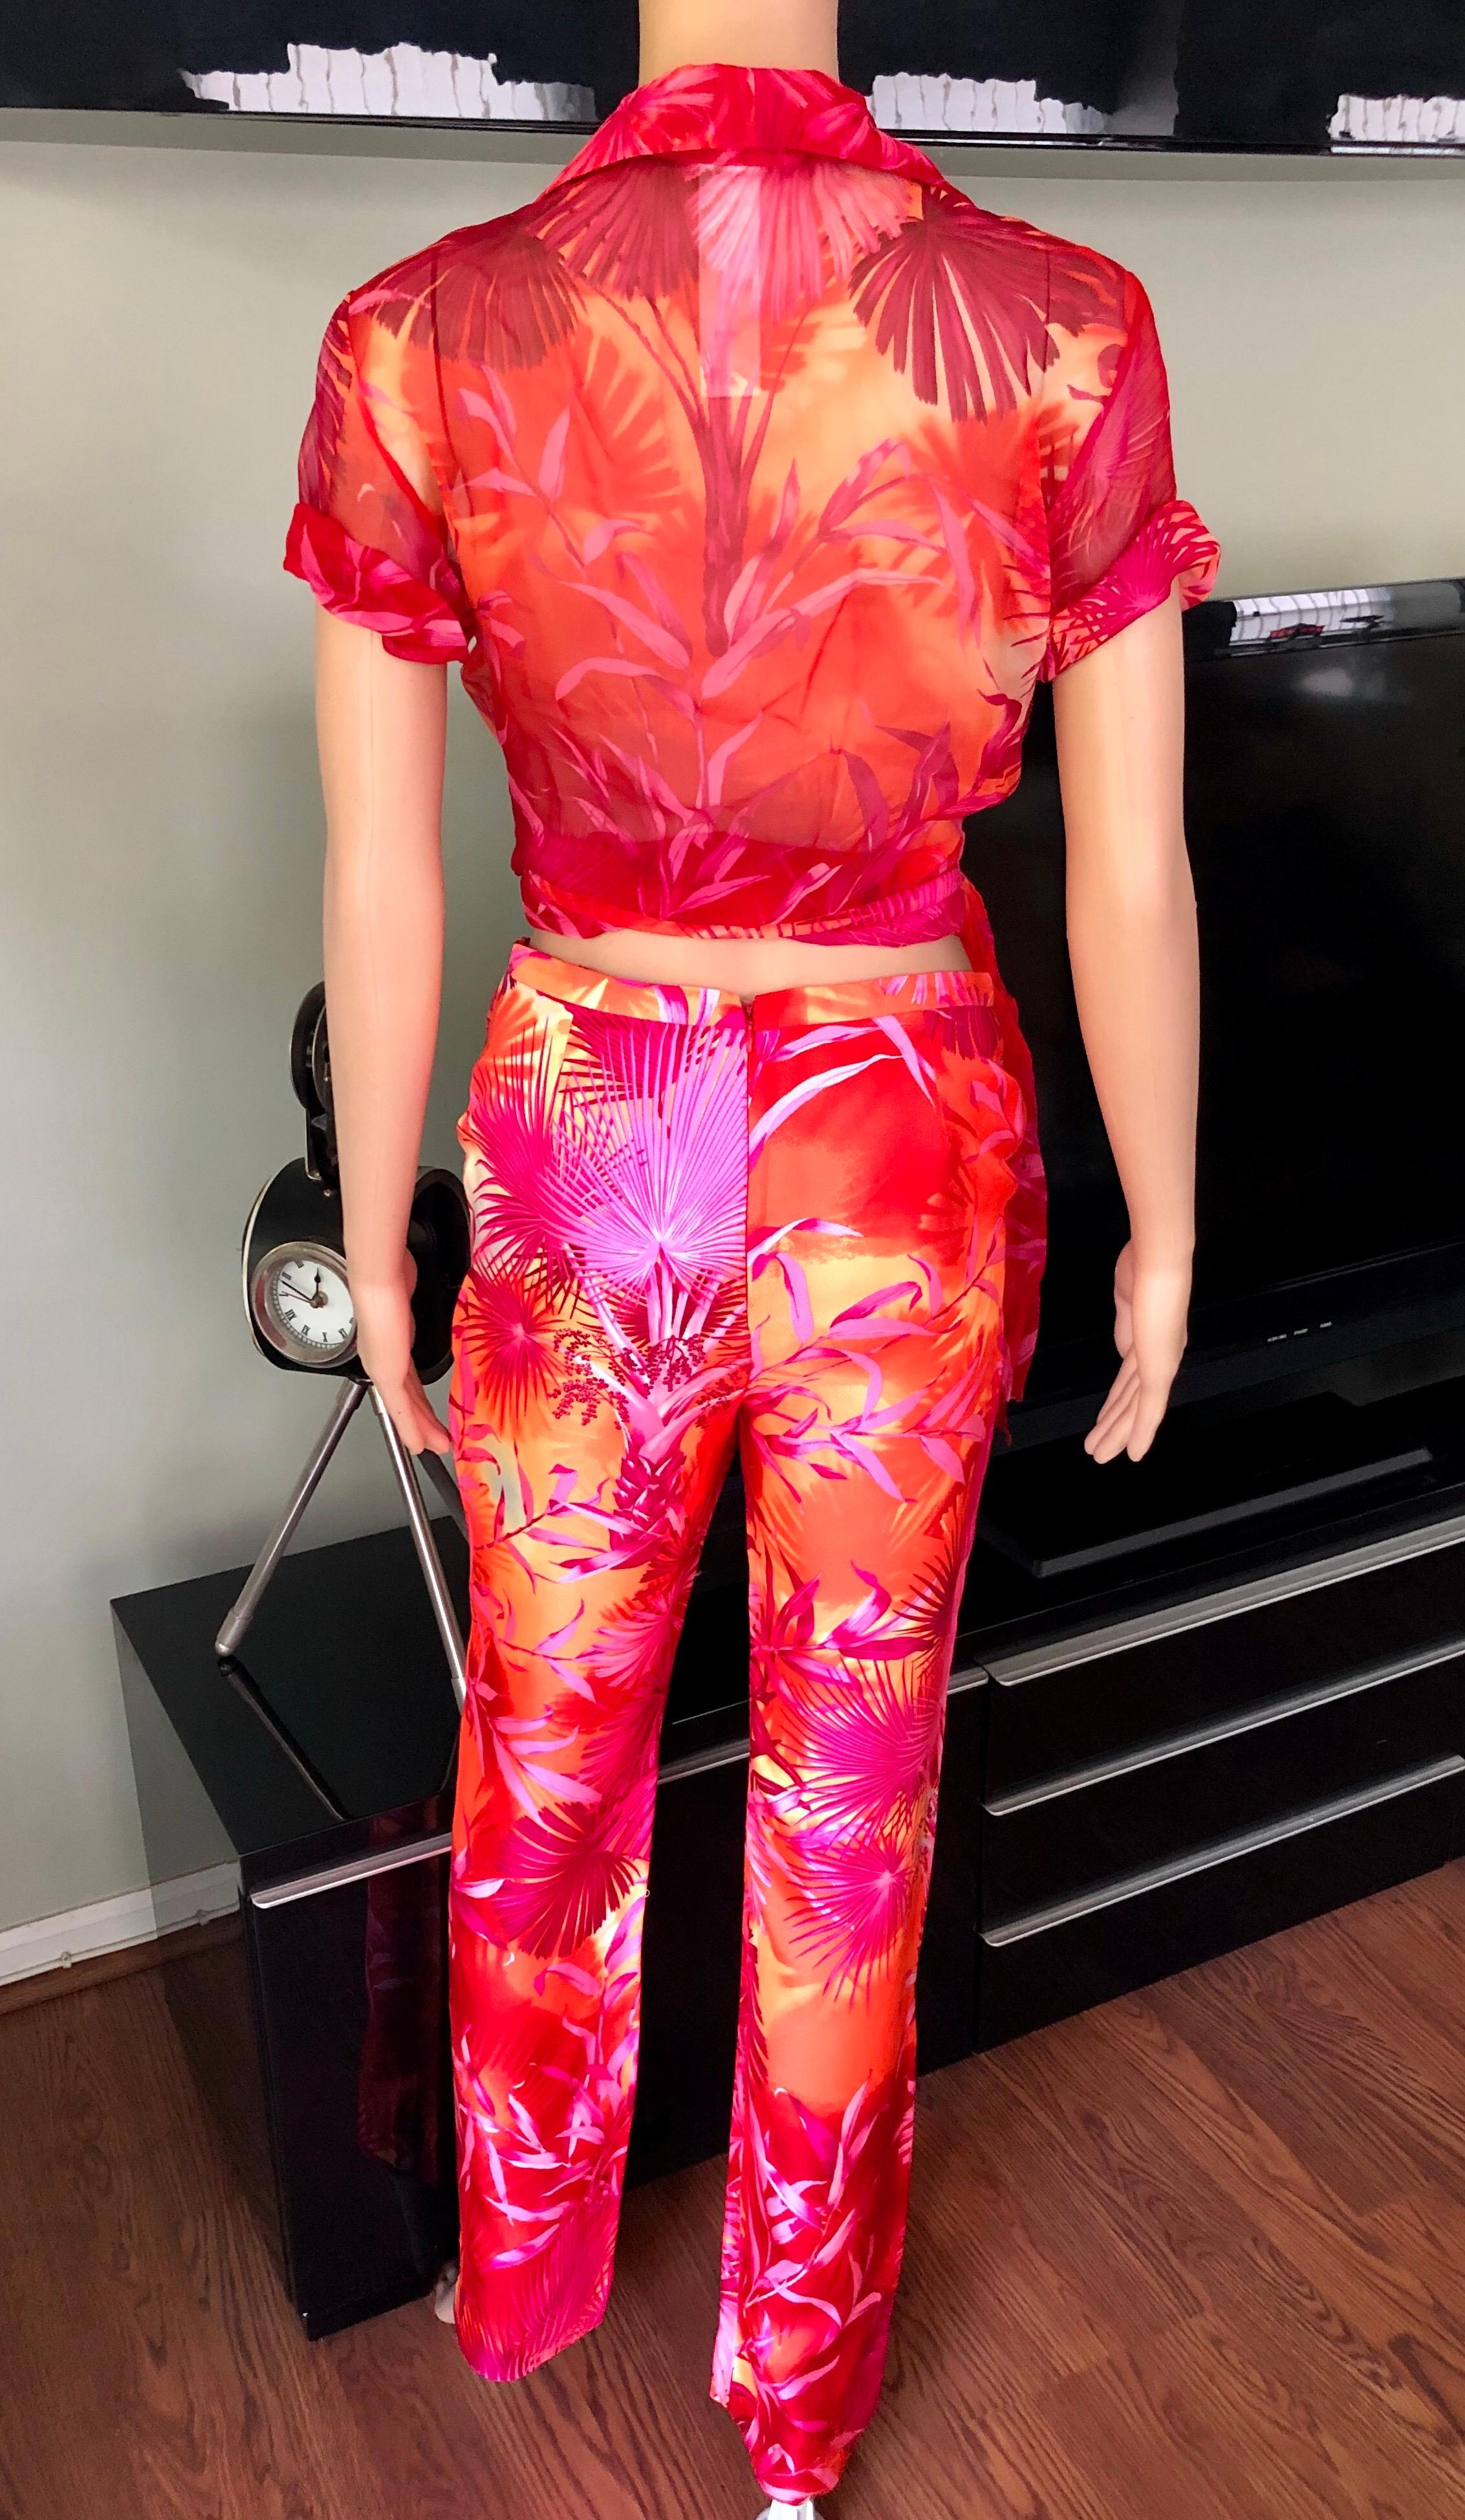 Gianni Versace S/S 2000 Runway Tropical Palm Print Pants & Blouse 2 Piece Set  In Good Condition For Sale In Naples, FL